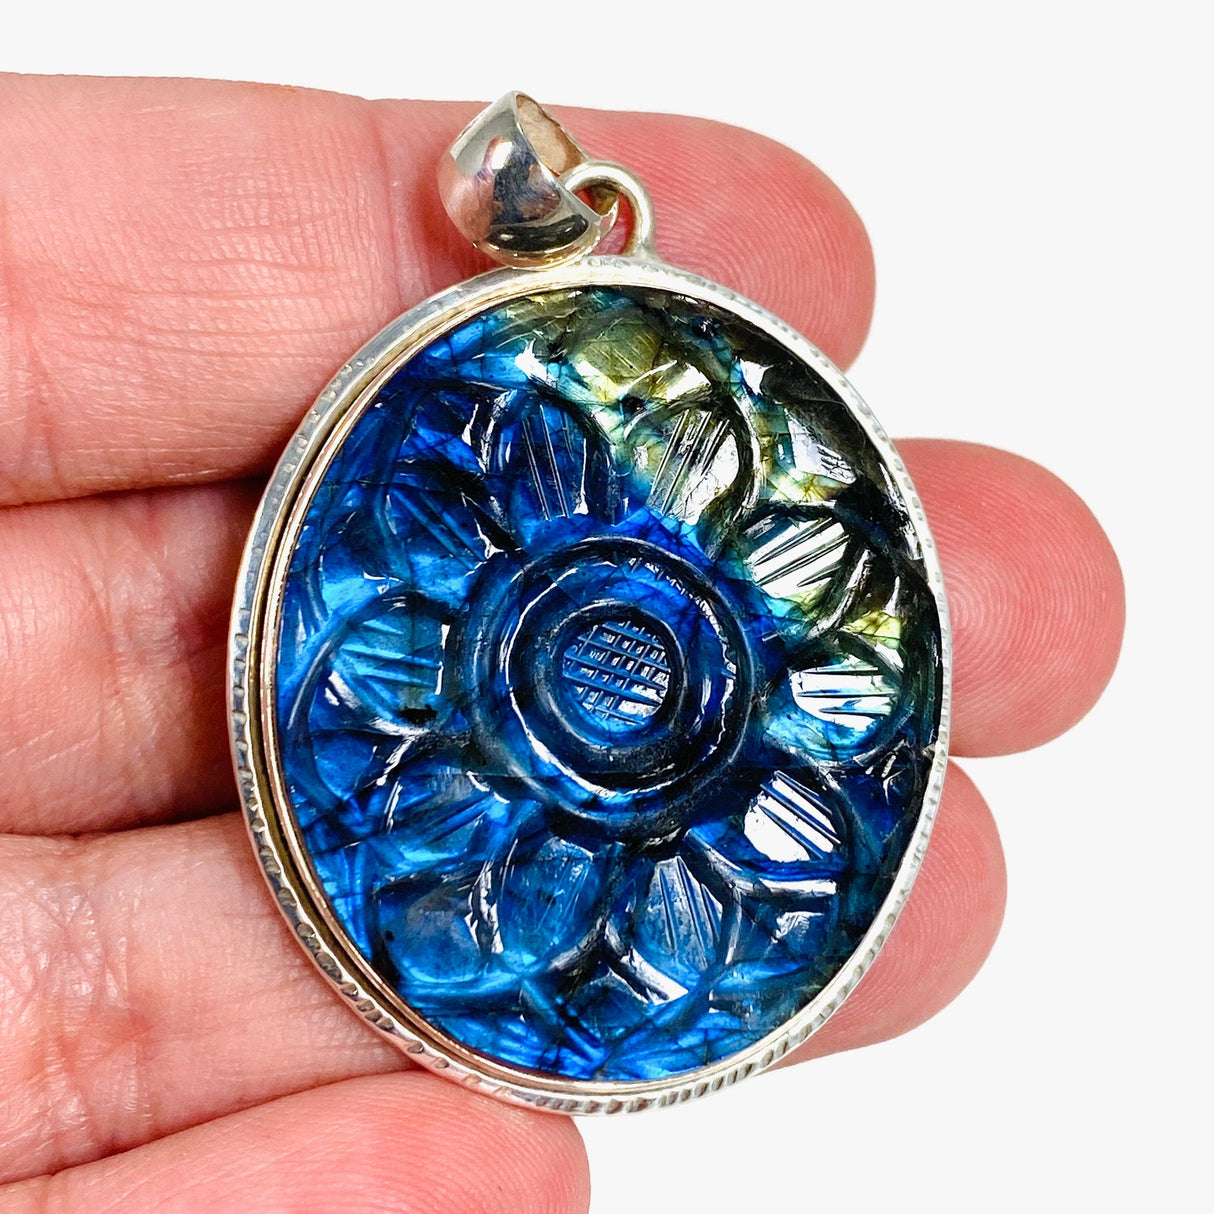 Oval shaped blue and gold flash labradorite flower carving pendant set in silver sitting in the hand